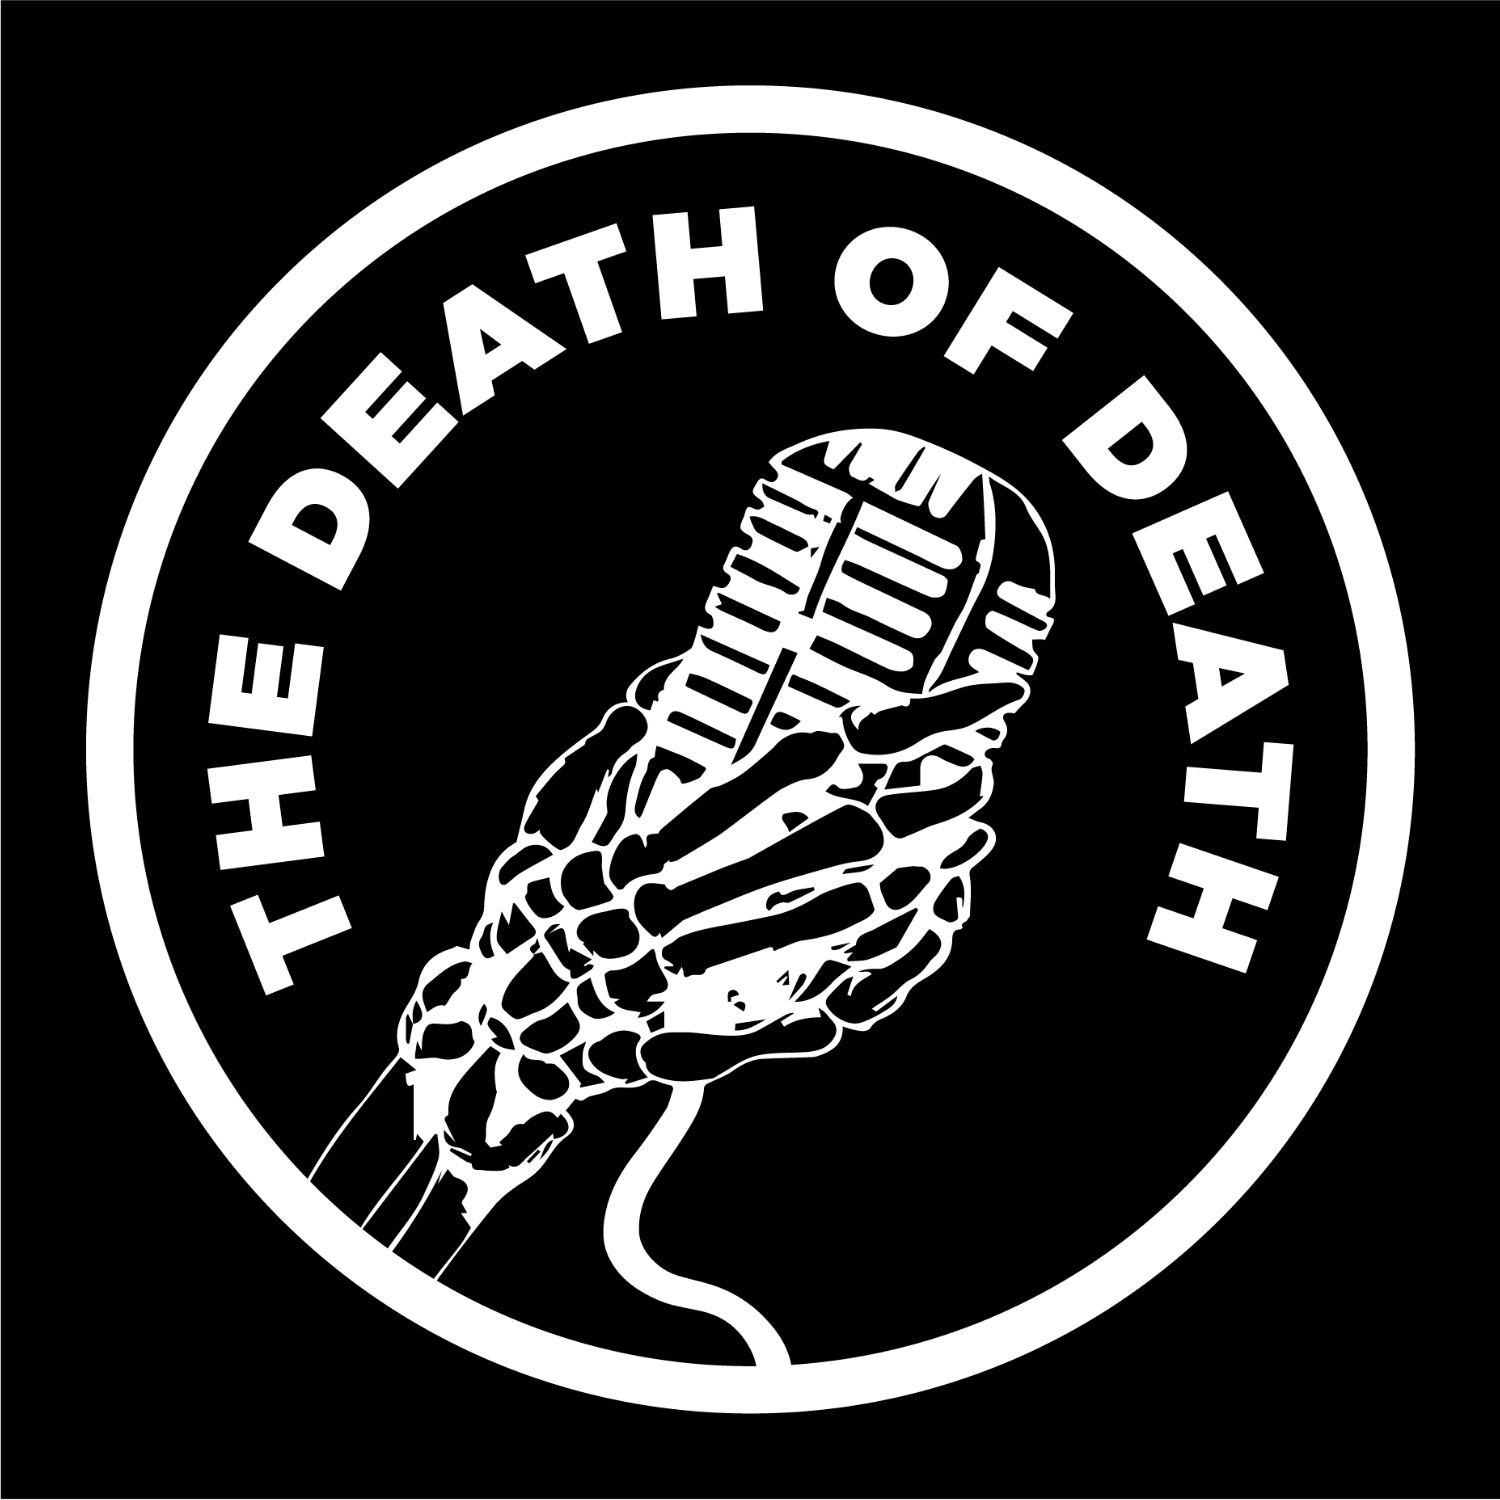 43: Why the Death of Death?